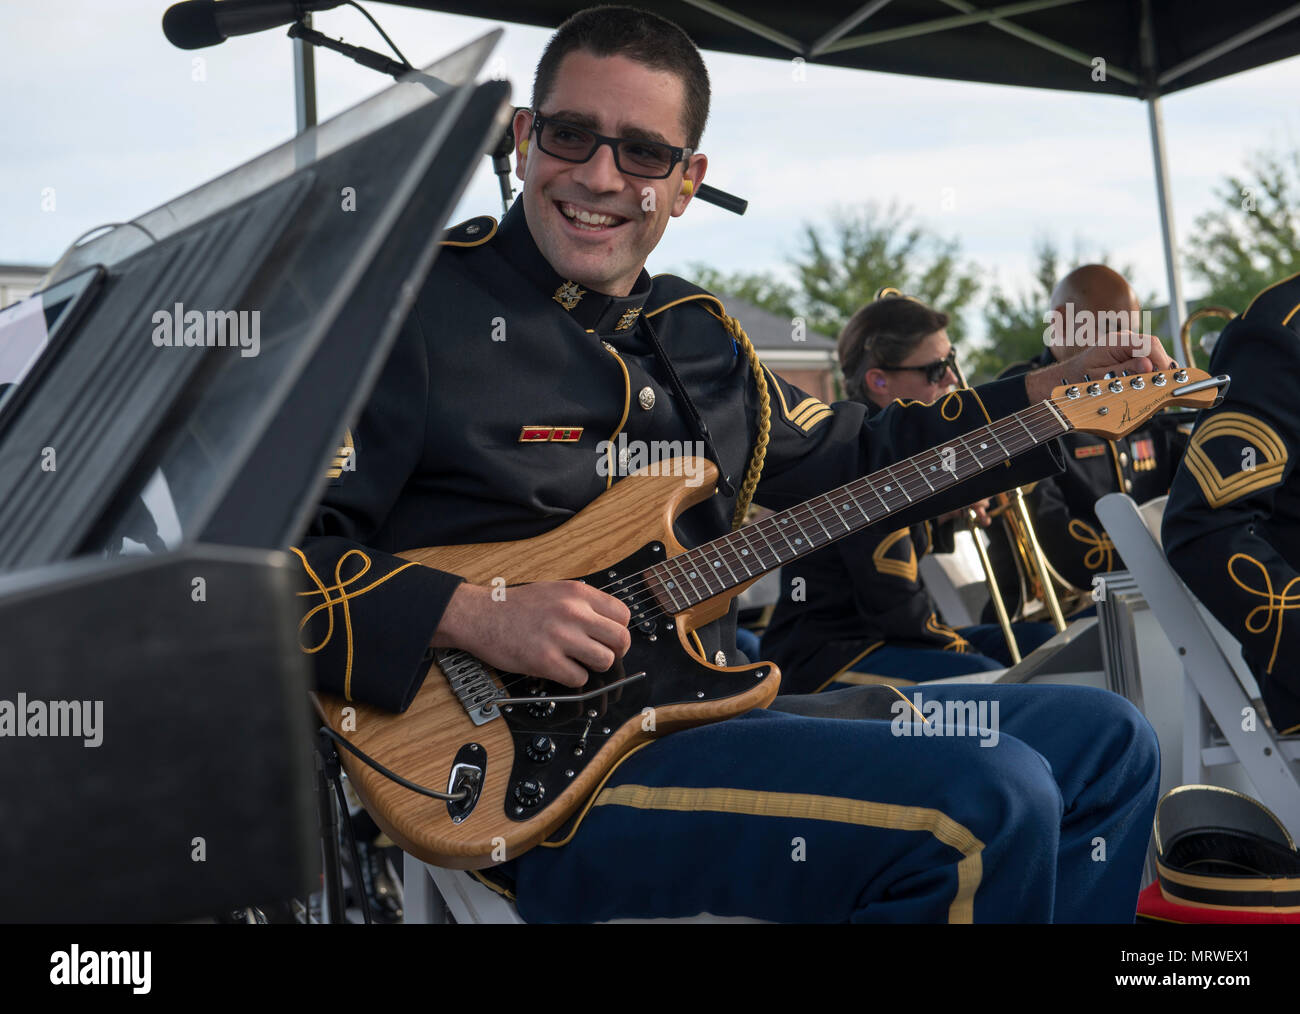 Staff Sgt. Michael G. Kramer, U.S. Army Blues Ensemble, The U.S. Army Band “Pershing’s Own,” tunes his guitar prior to the next musical selection during Twilight Tattoo, June 28, 2017, on Summerall Field, Joint Base Myer-Henderson Hall, Va. Twilight Tattoo is an hour-long, live-action military performance featuring performances by Soldiers from the 3d U.S. Infantry Regiment (The Old Guard) and The U.S. Army Band 'Pershing's Own.” (U.S. Army photo by Staff Sgt. Austin L. Thomas) Stock Photo